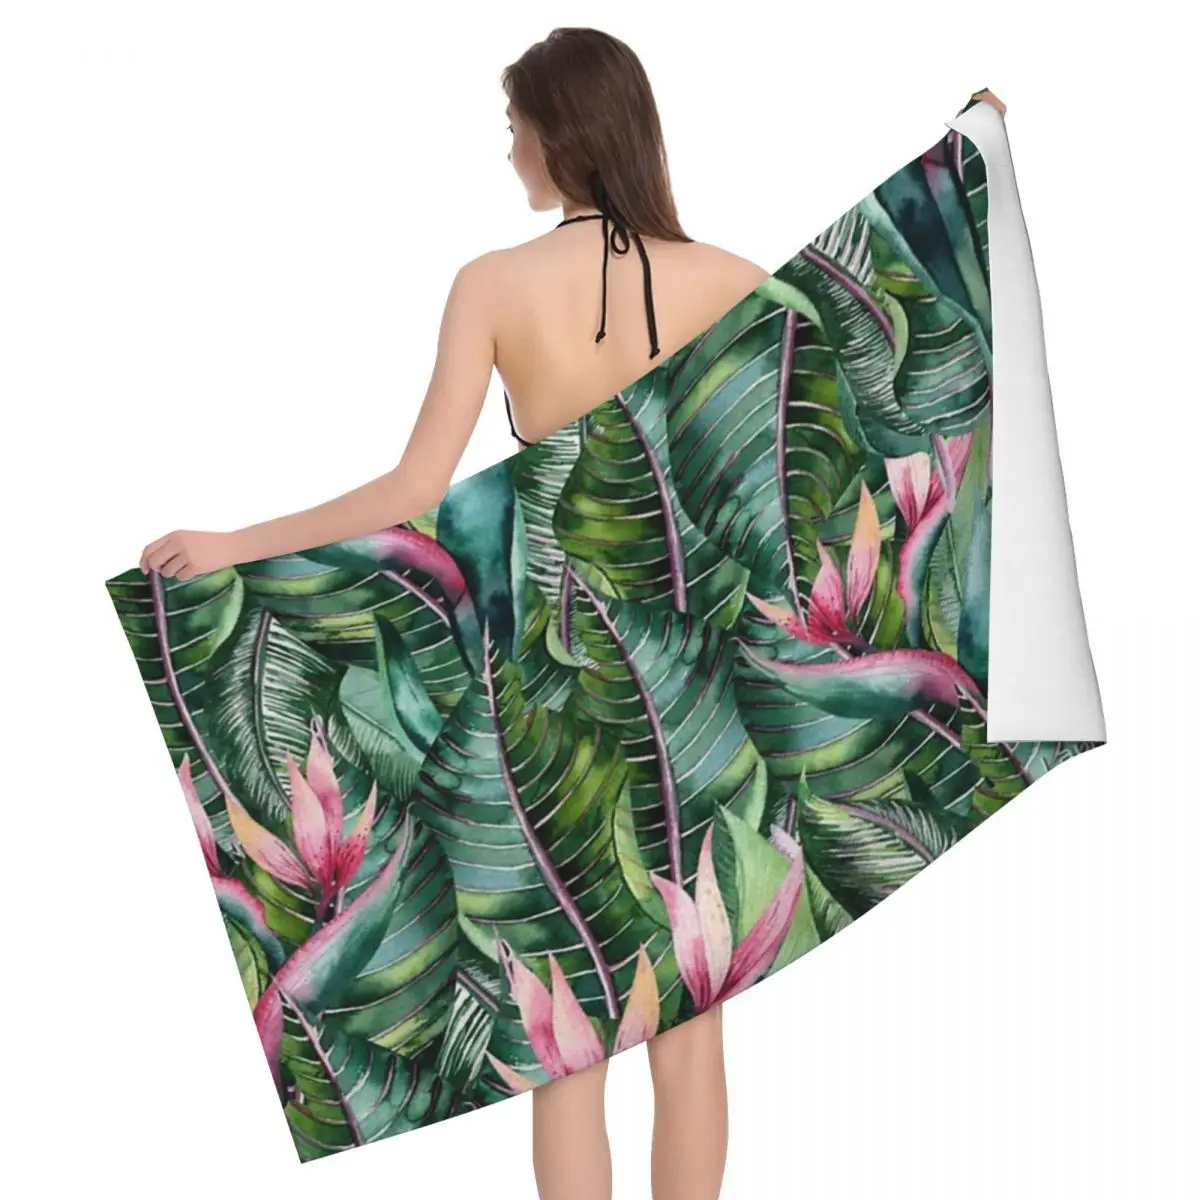 

Tropical Banana Leaf Print 80x130cm Bath Towel Brightly Printed For Outdoor Great Gift